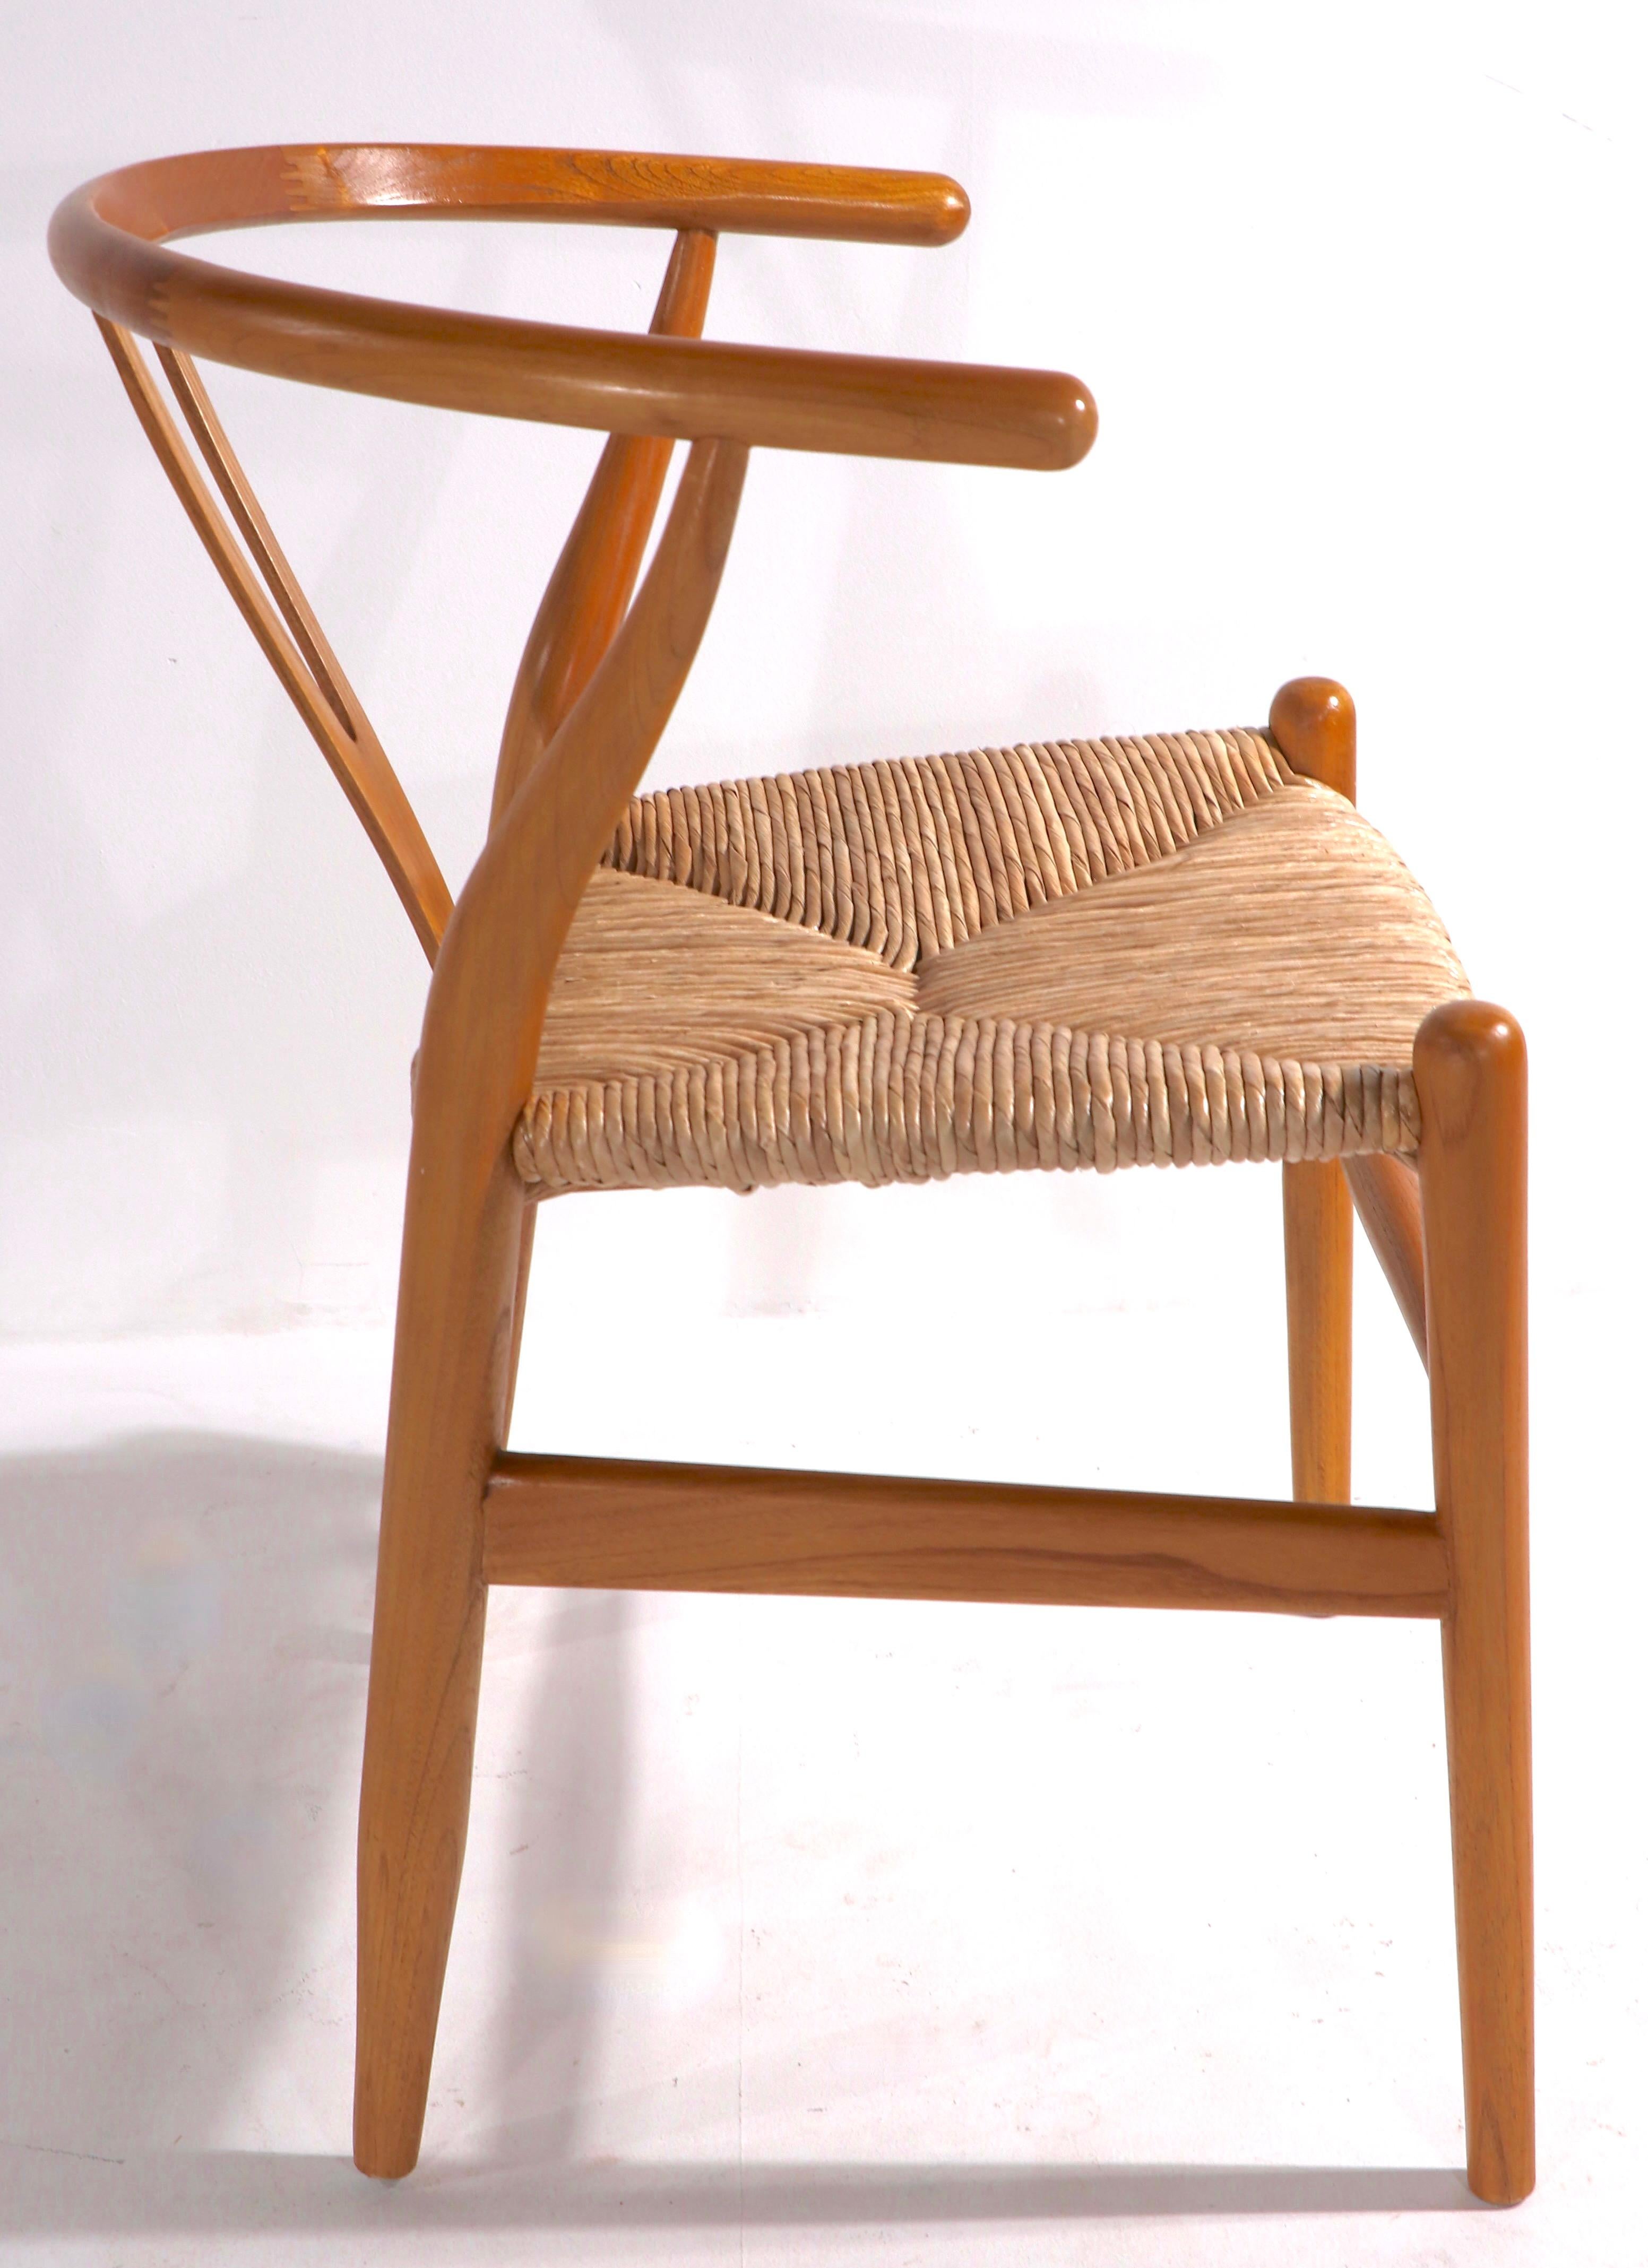 Wood Pair of Chairs